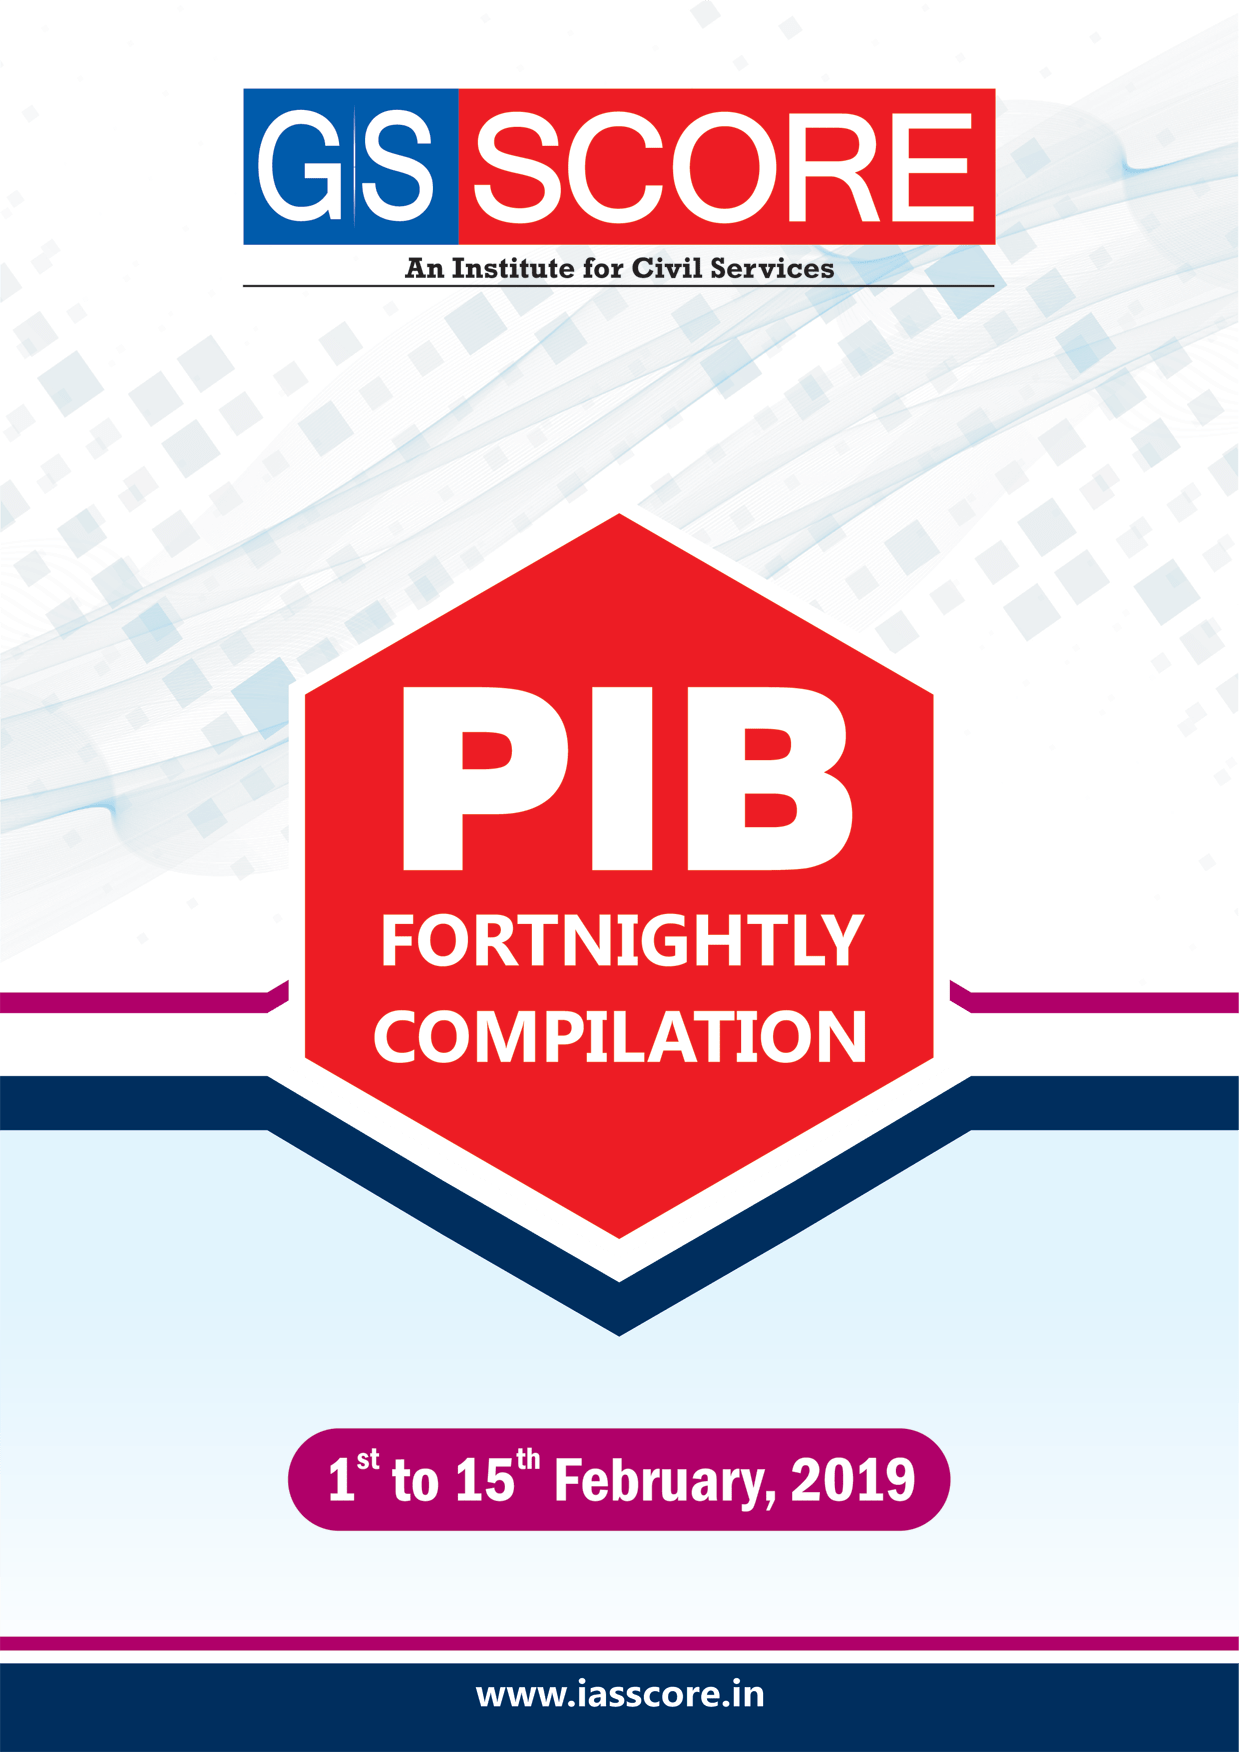 GS Score PIB 1st to 15th February 2019